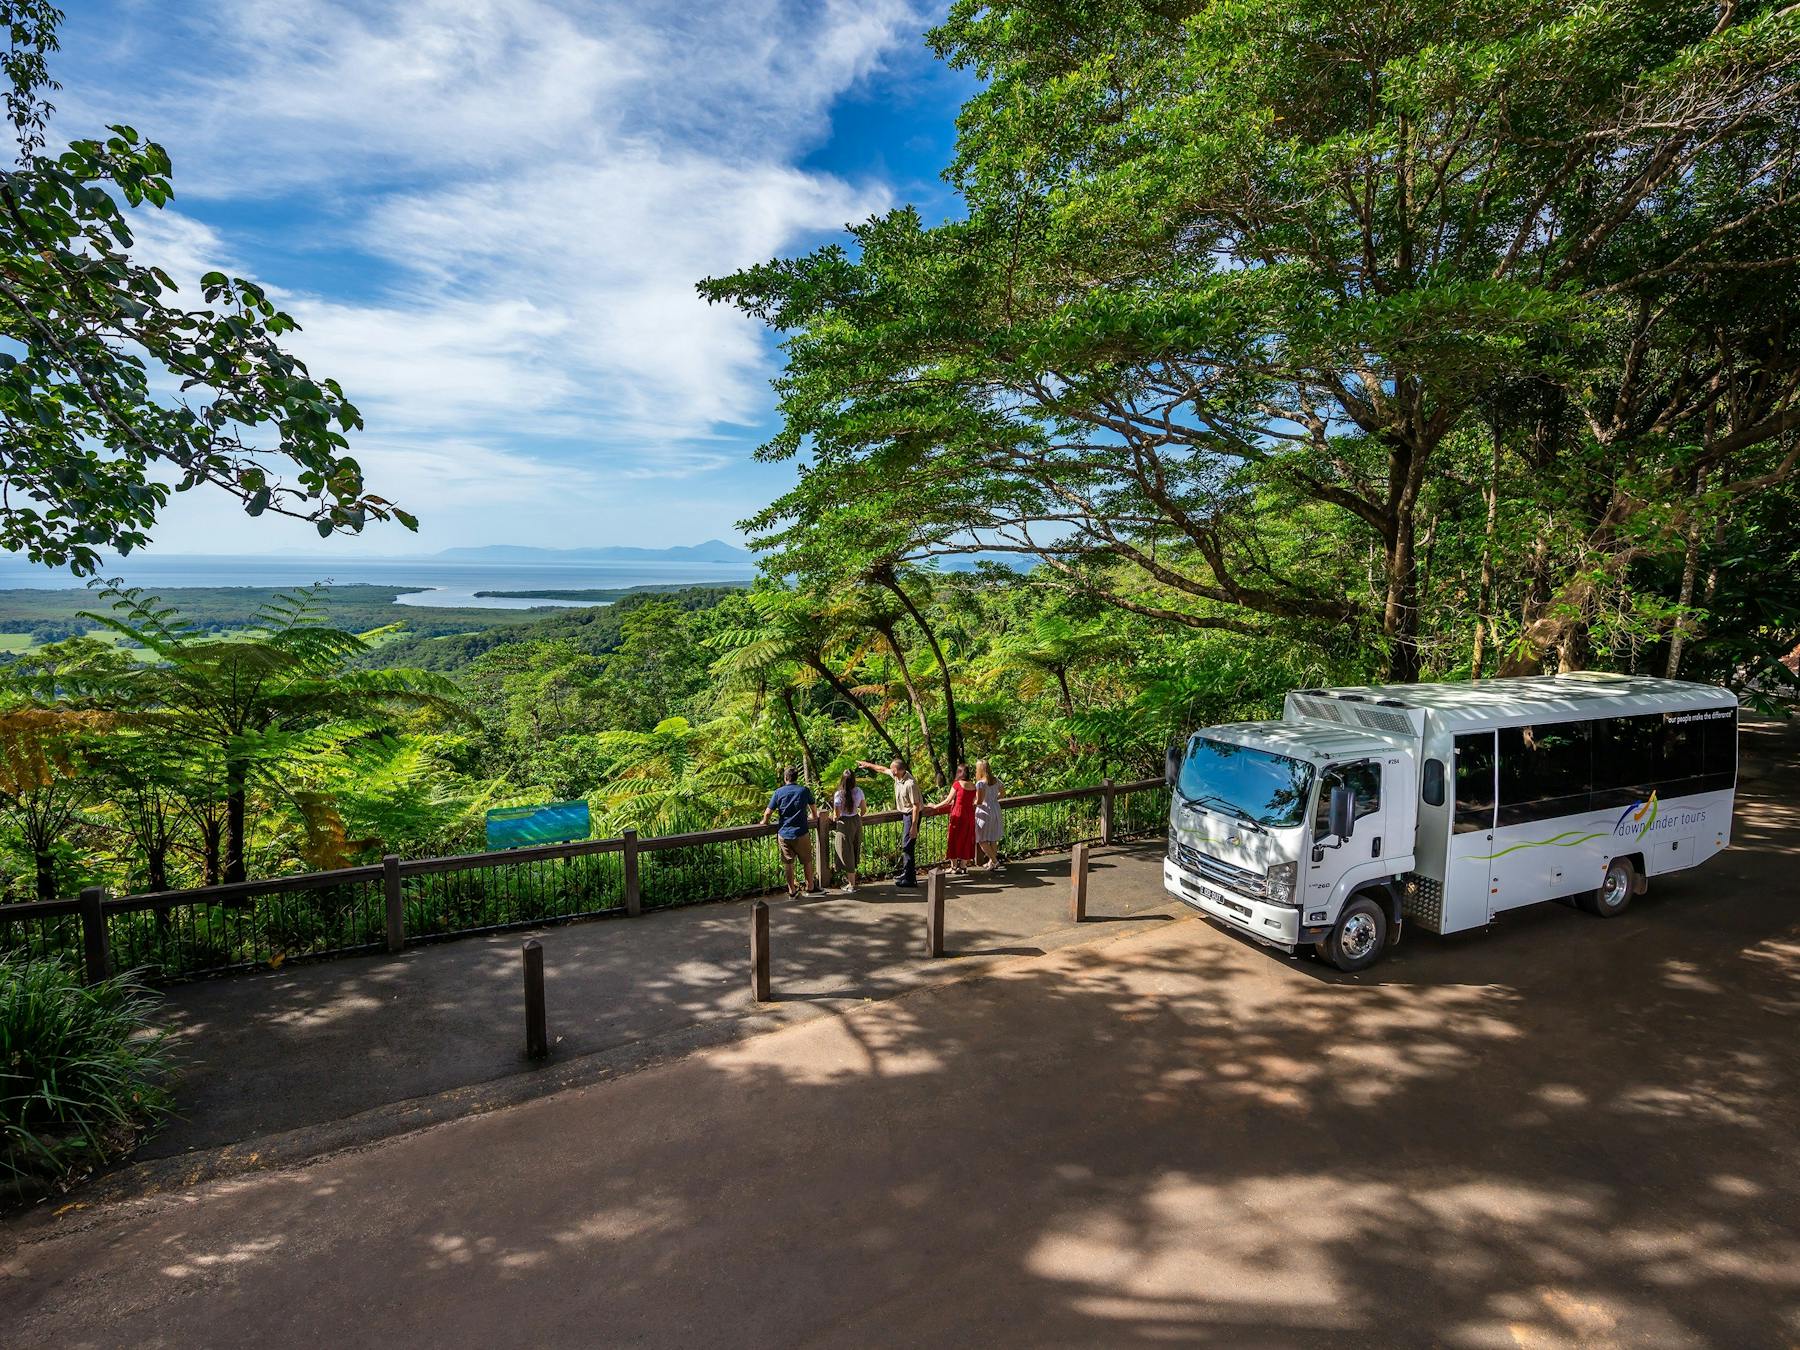 Passengers standing at Alexandra Lookout with view of rainforest canopy out to the ocean in distance